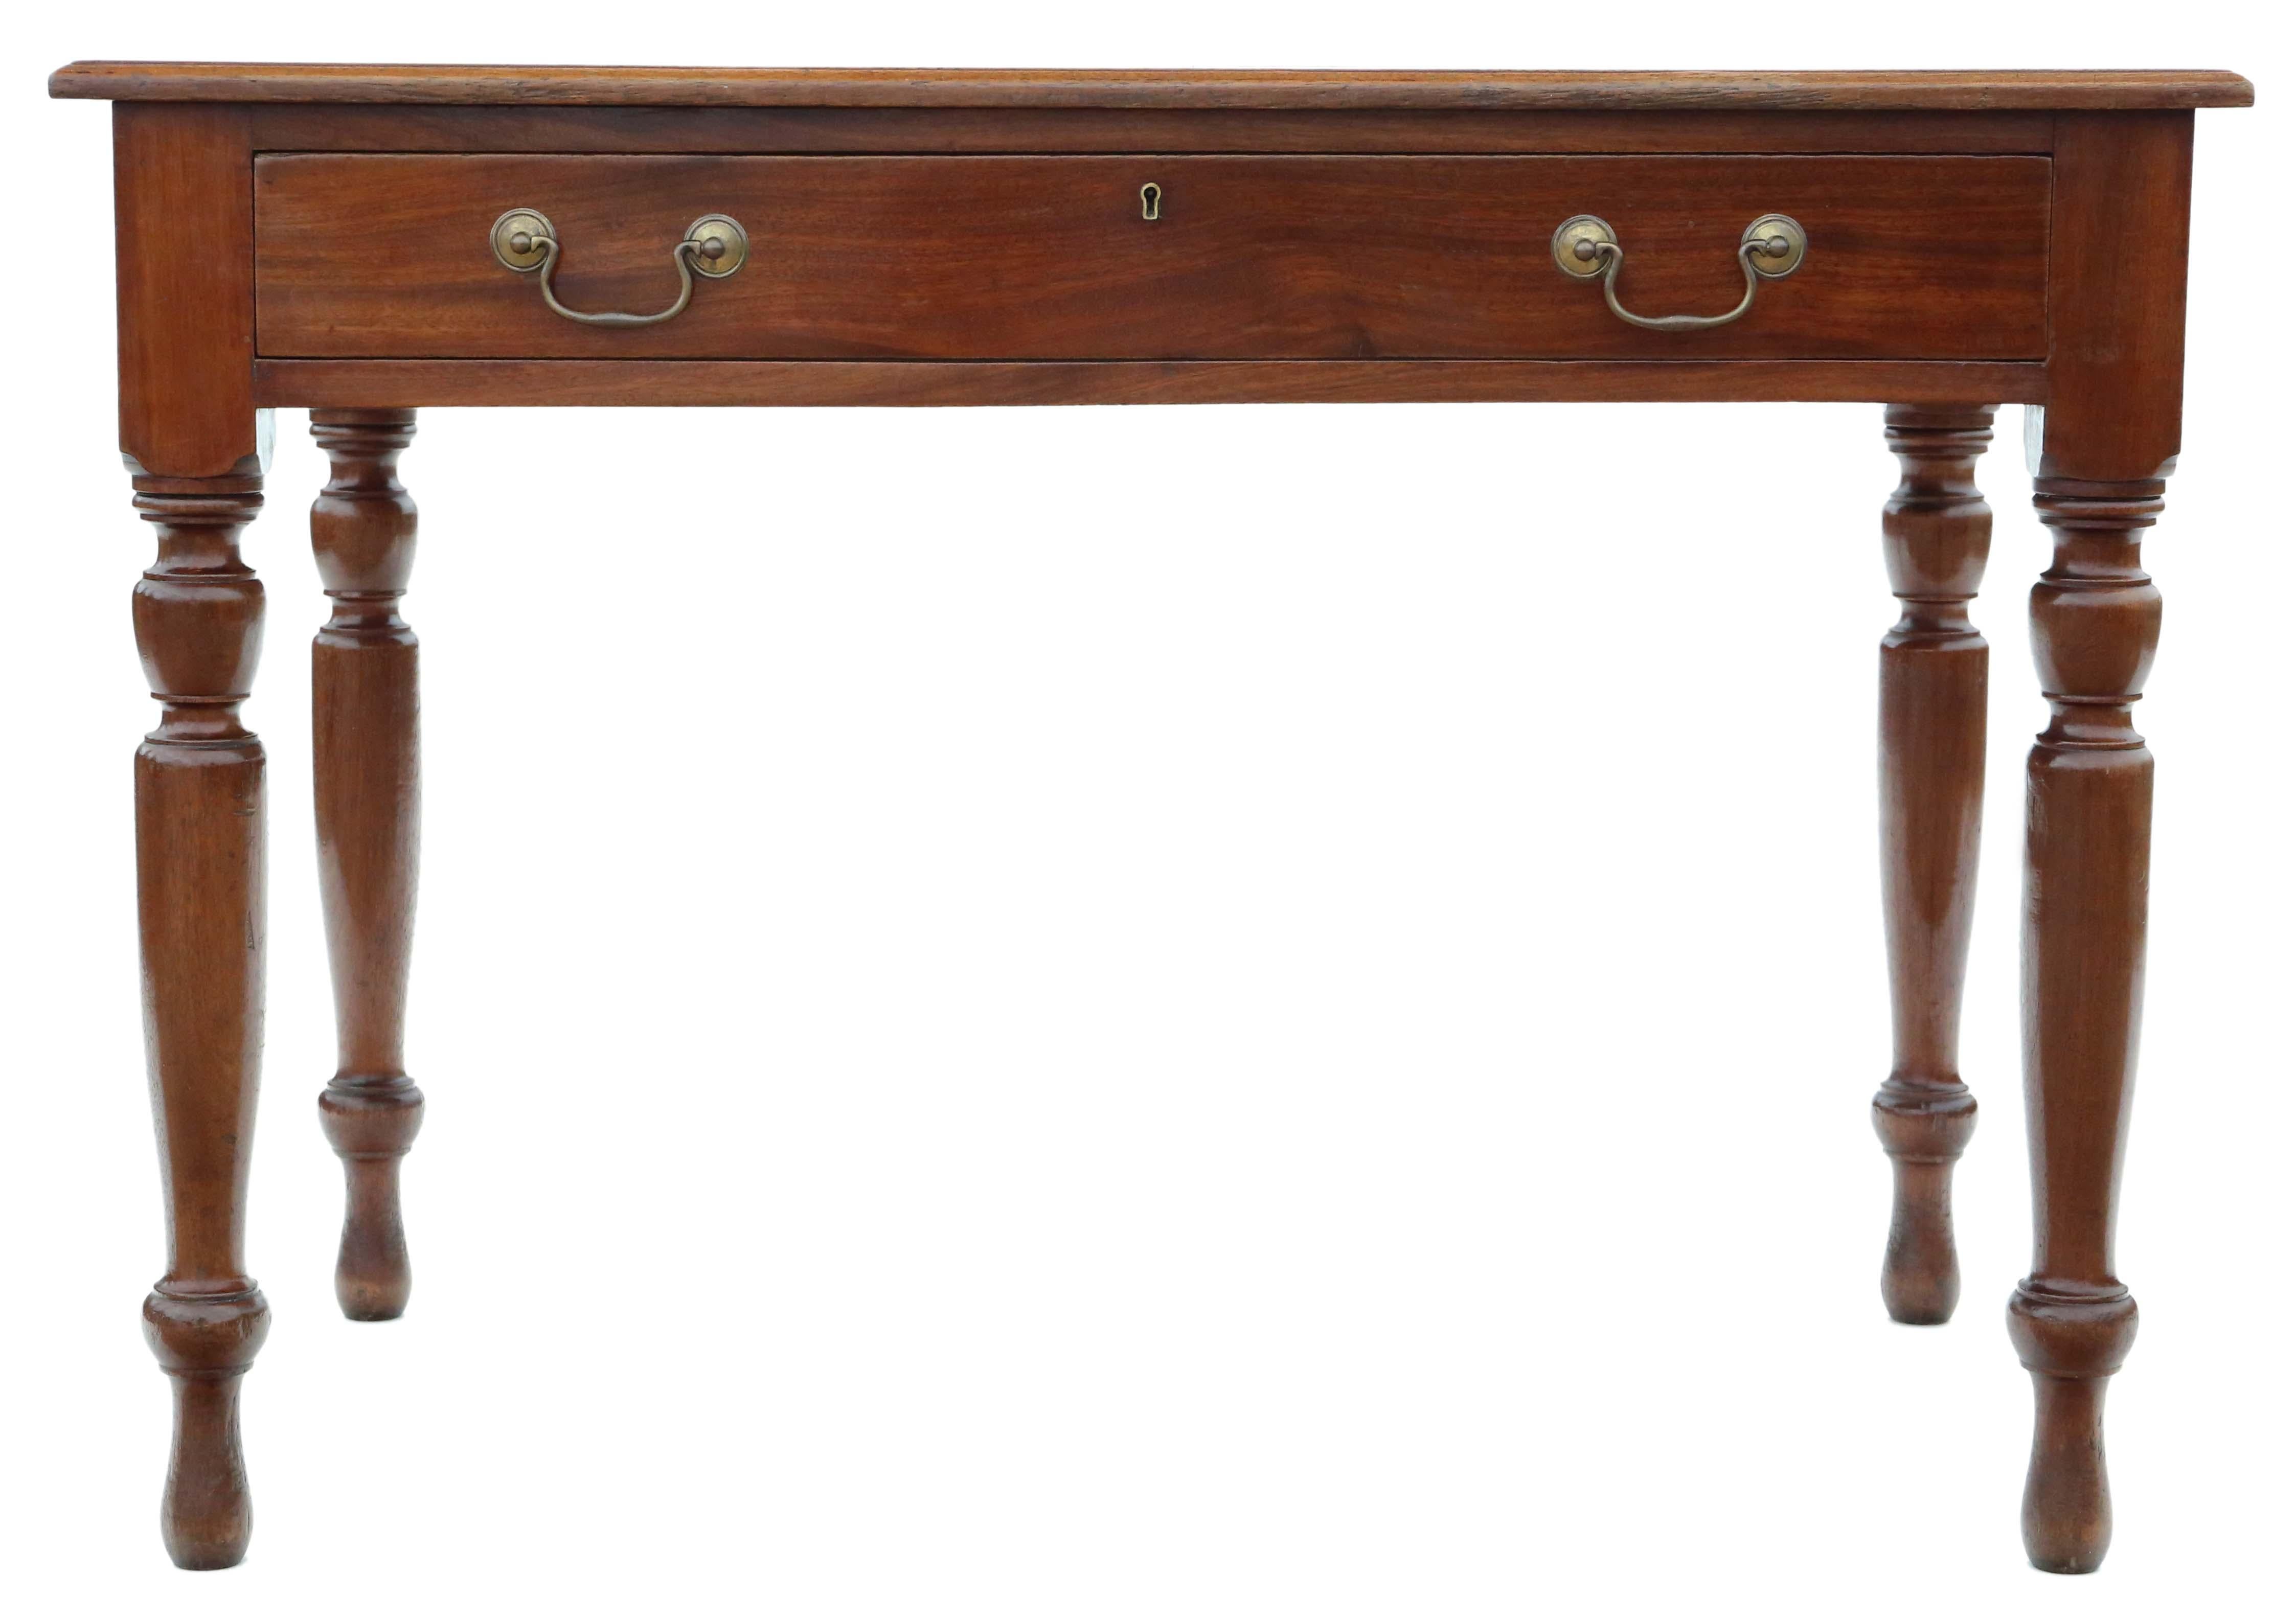 Antique late 19th Century mahogany writing side dressing table desk. Lovely age colour and patina.

No loose joints and no woodworm. Full of age, character and charm. The drawers slide freely.

Would look great in the right location! A charming,